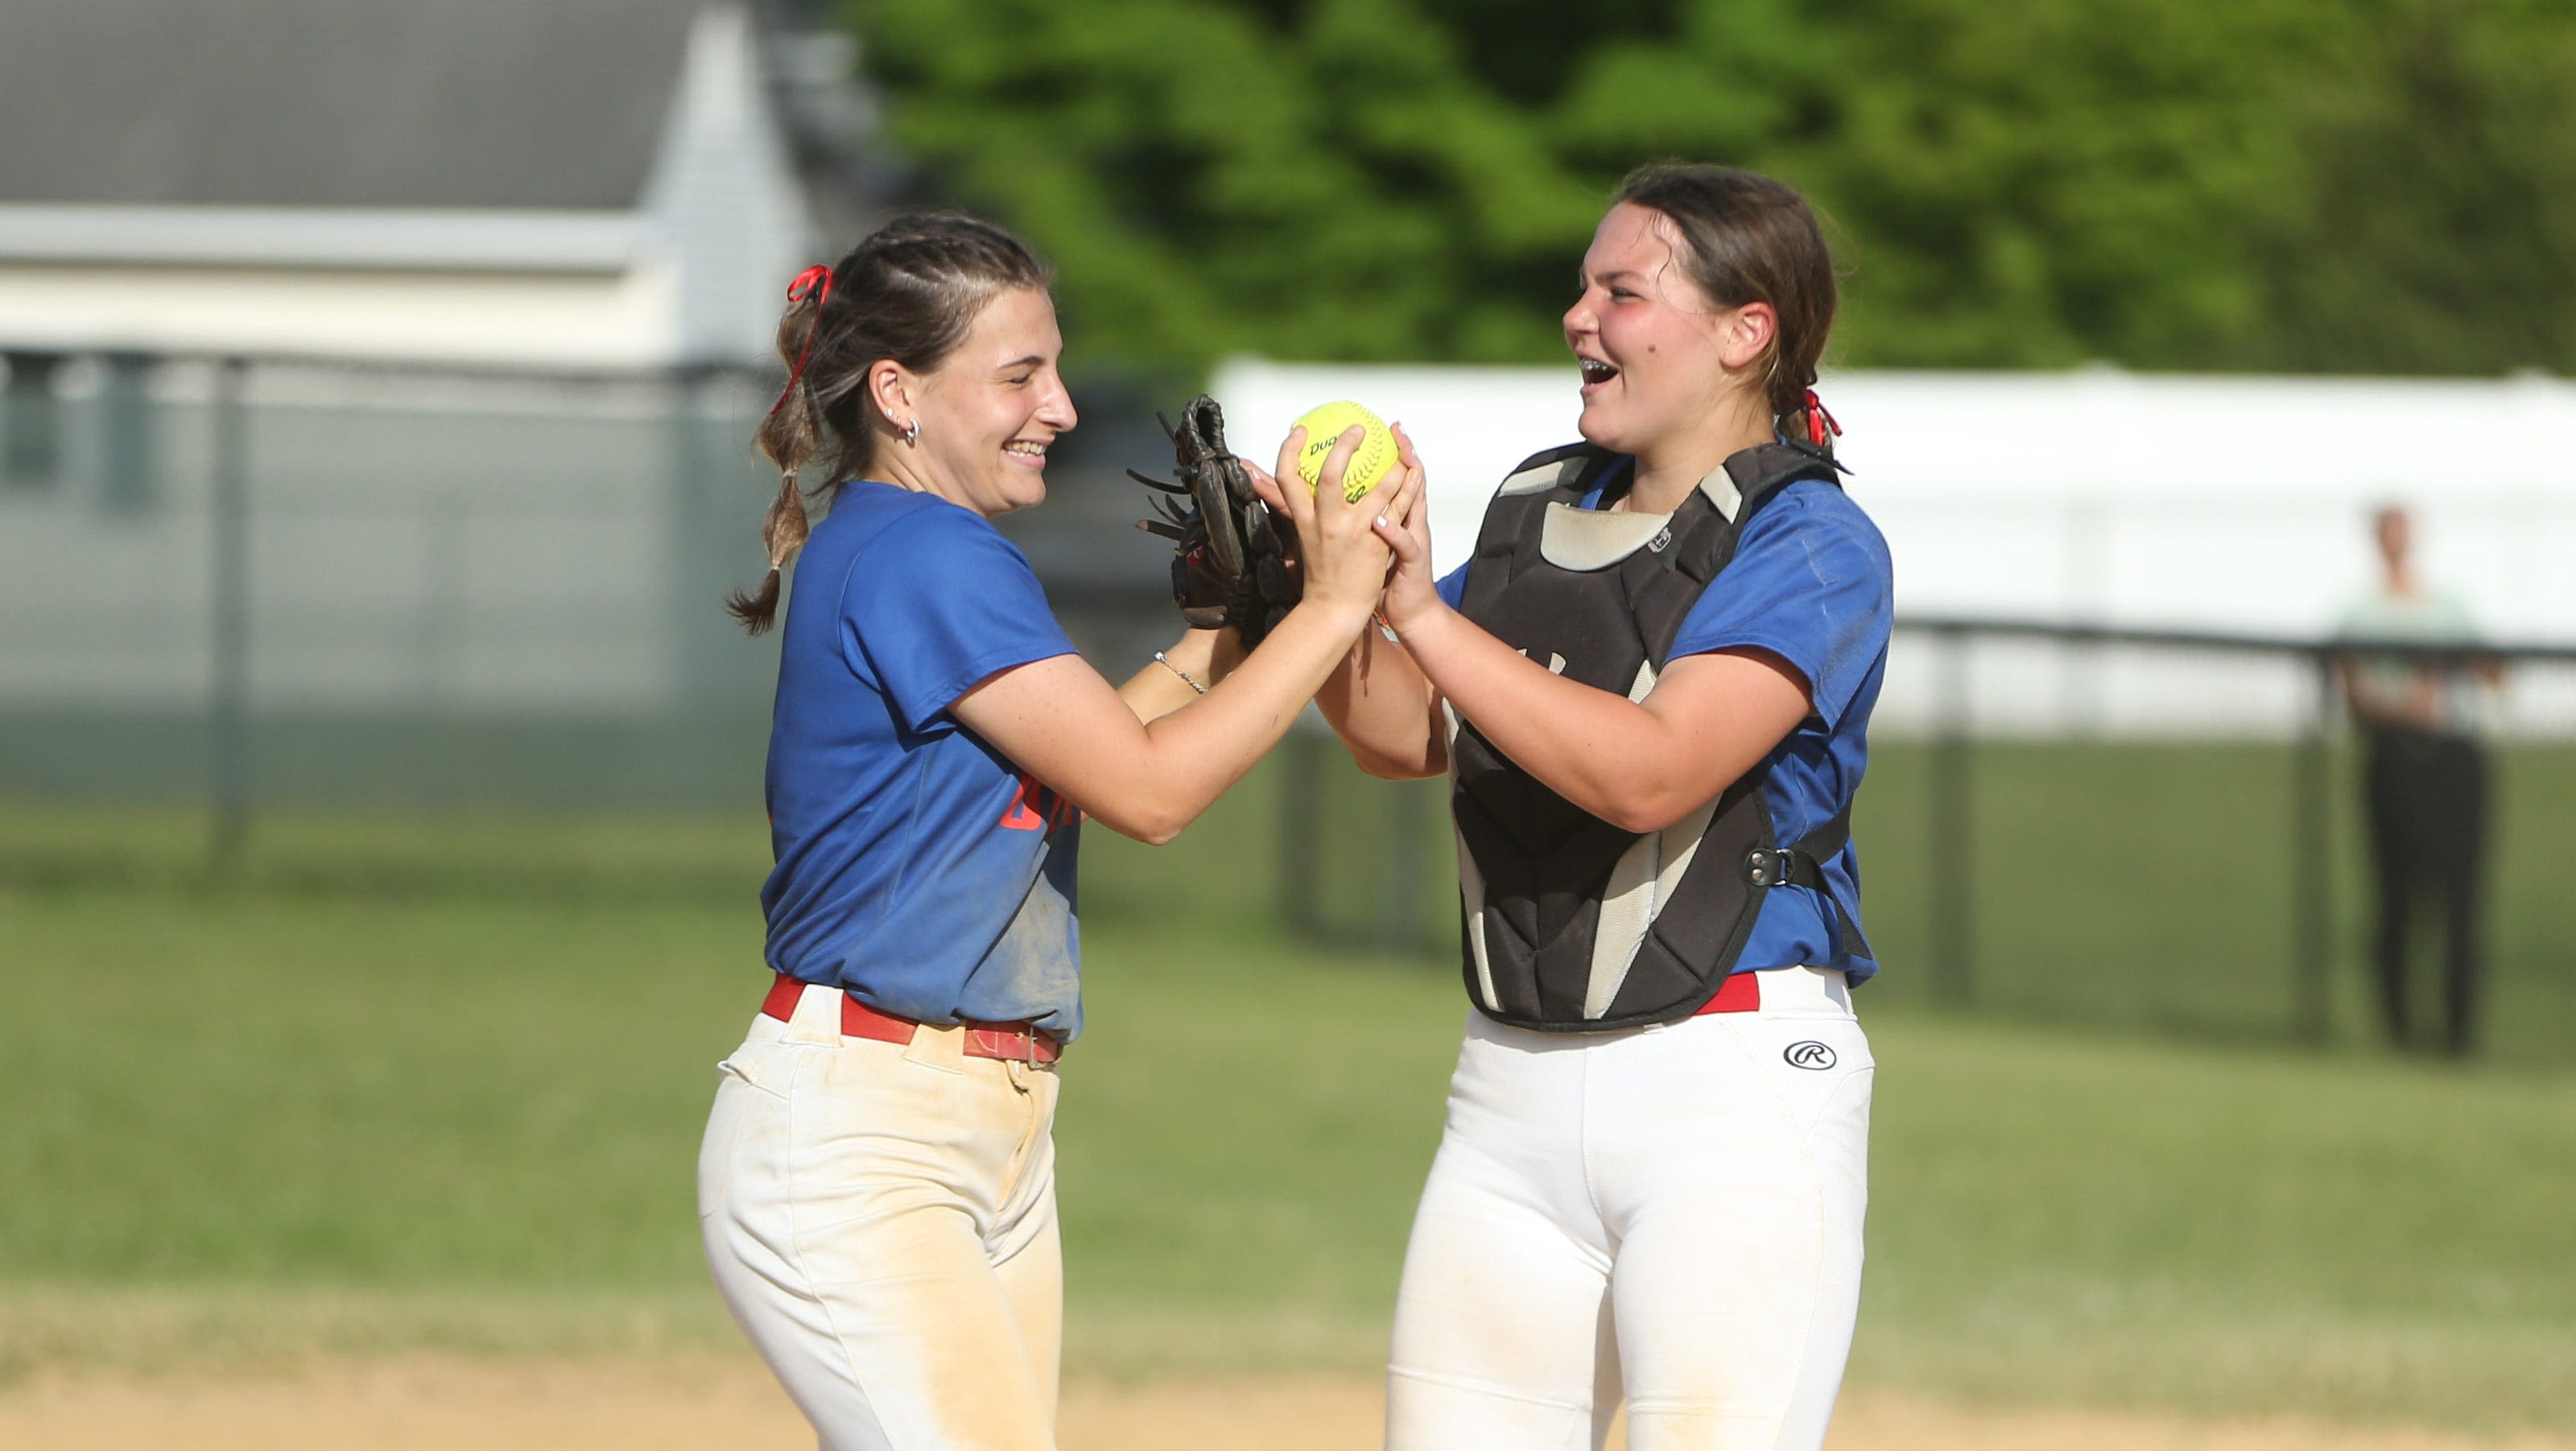 Softball: Freiberger dazzles as Goshen upsets Roosevelt to reach Section 9 semifinals